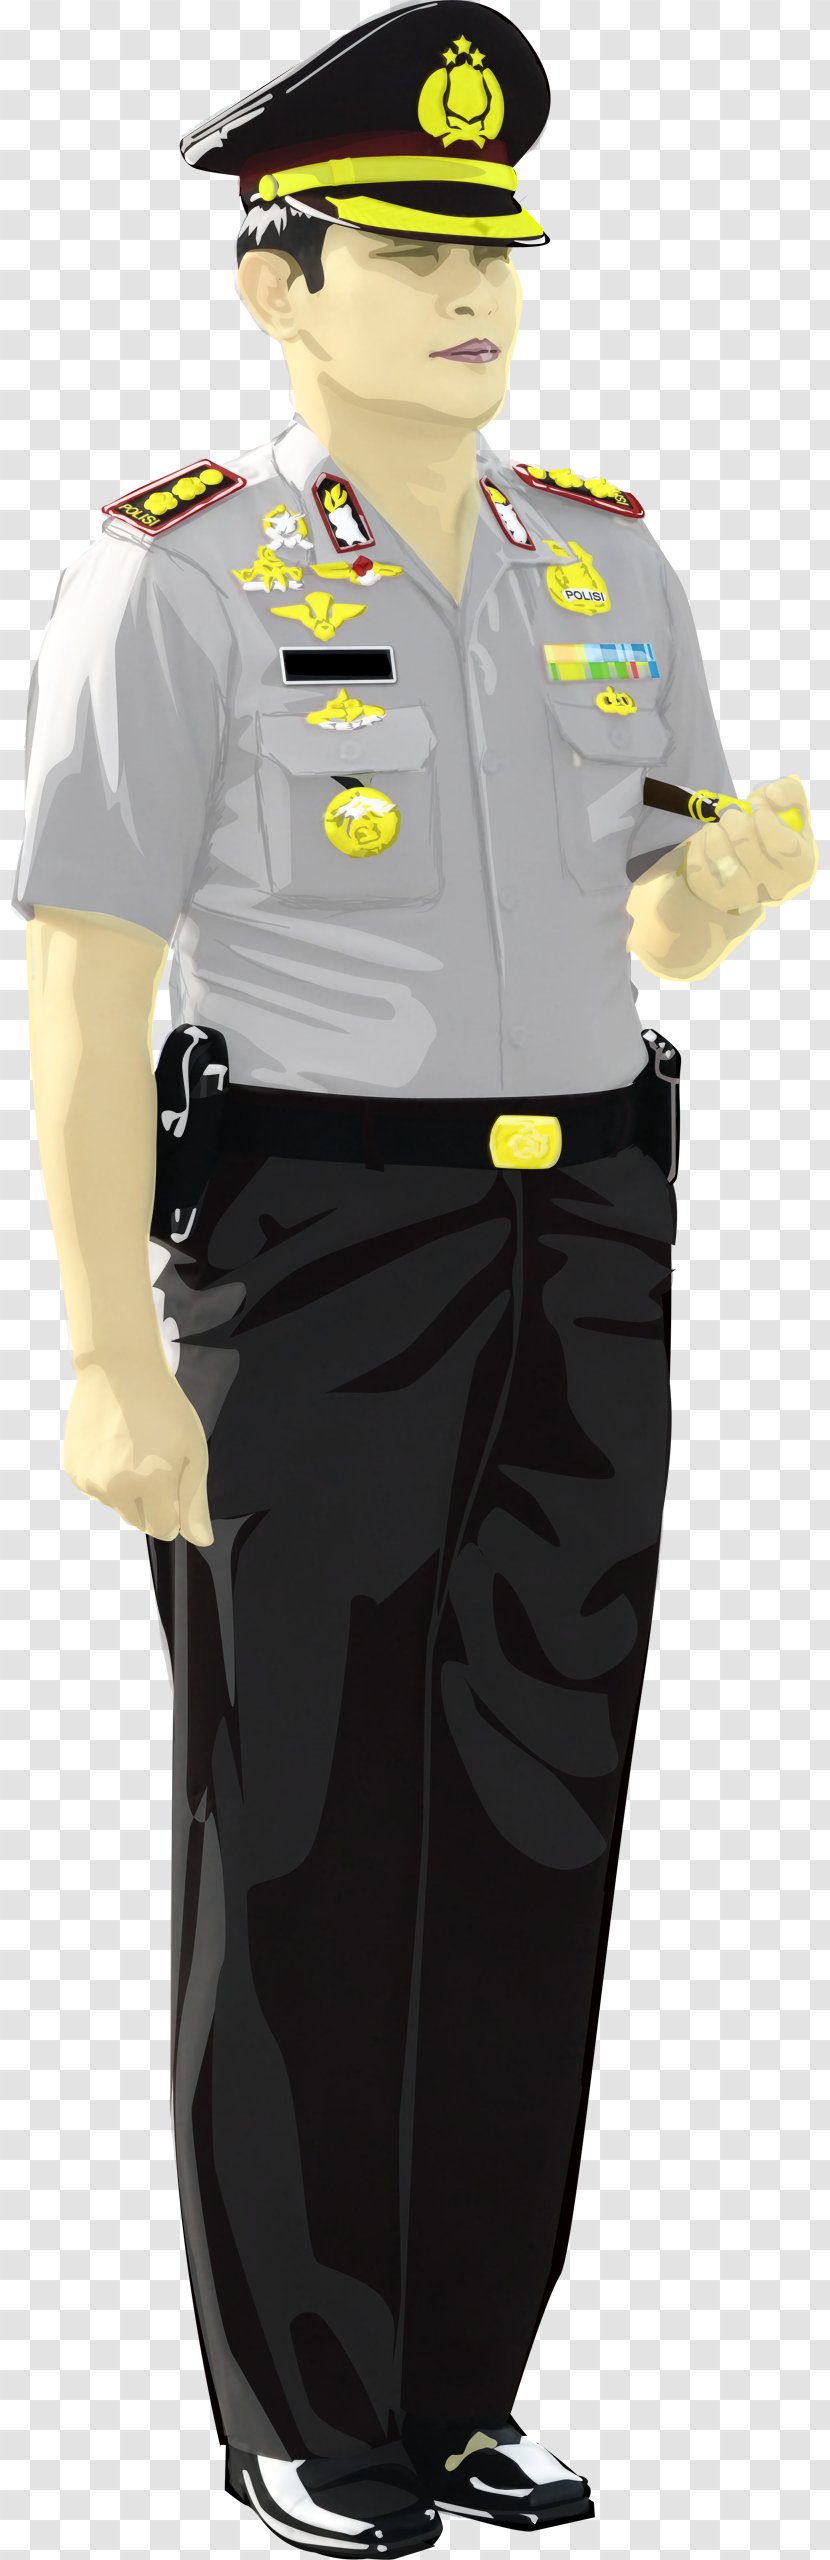 Indonesian National Police Army Officer Security Guard - Yellow - Trampoline Transparent PNG